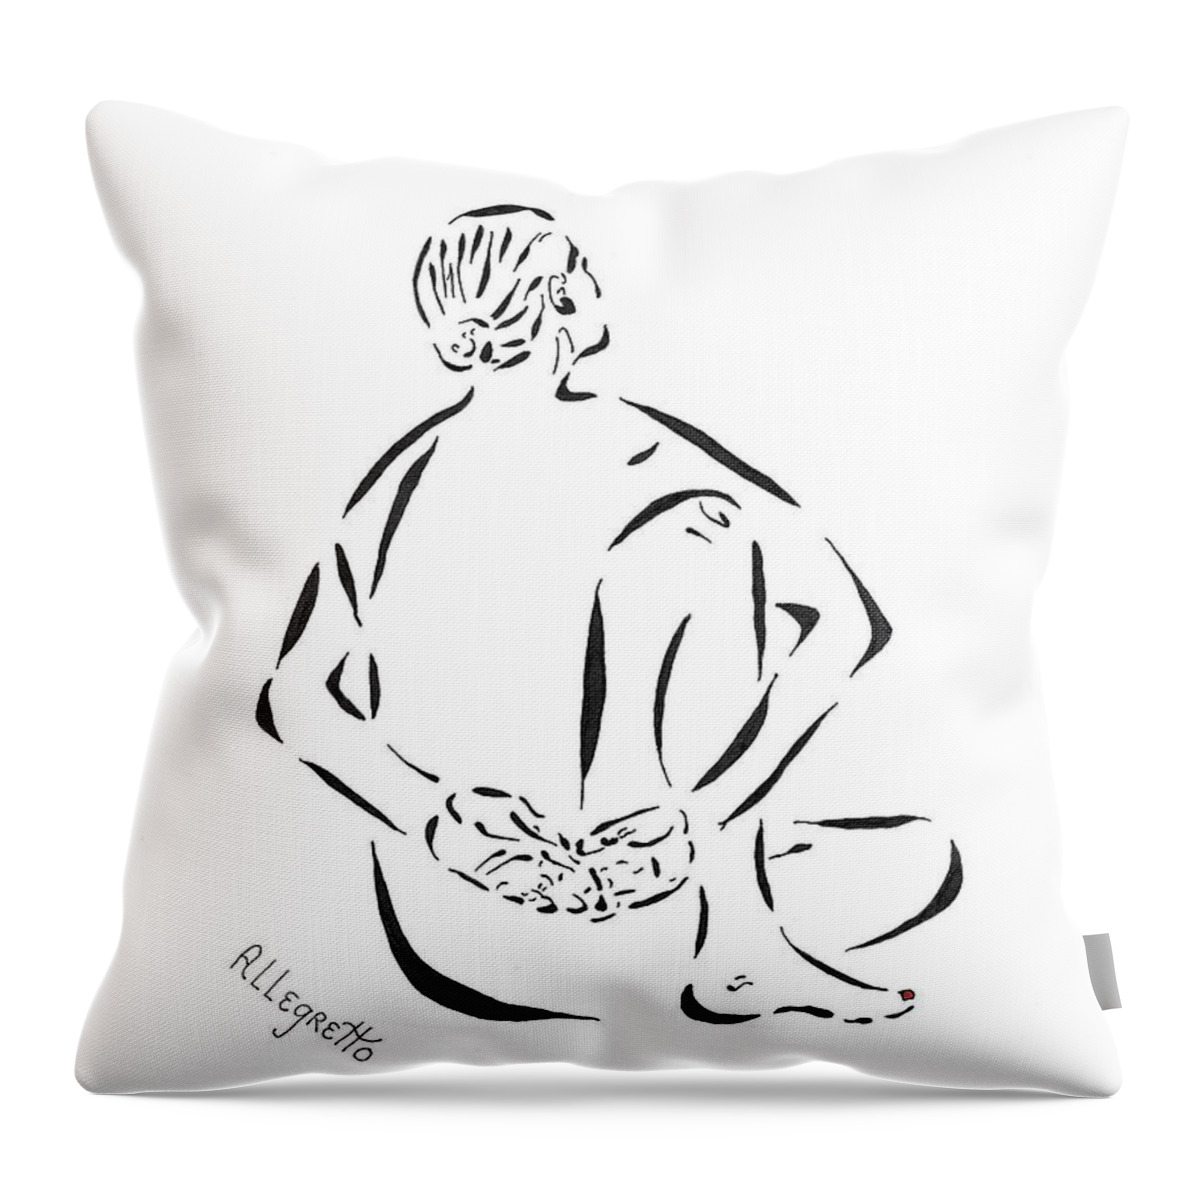  Throw Pillow featuring the painting Yoga by Pamela Allegretto